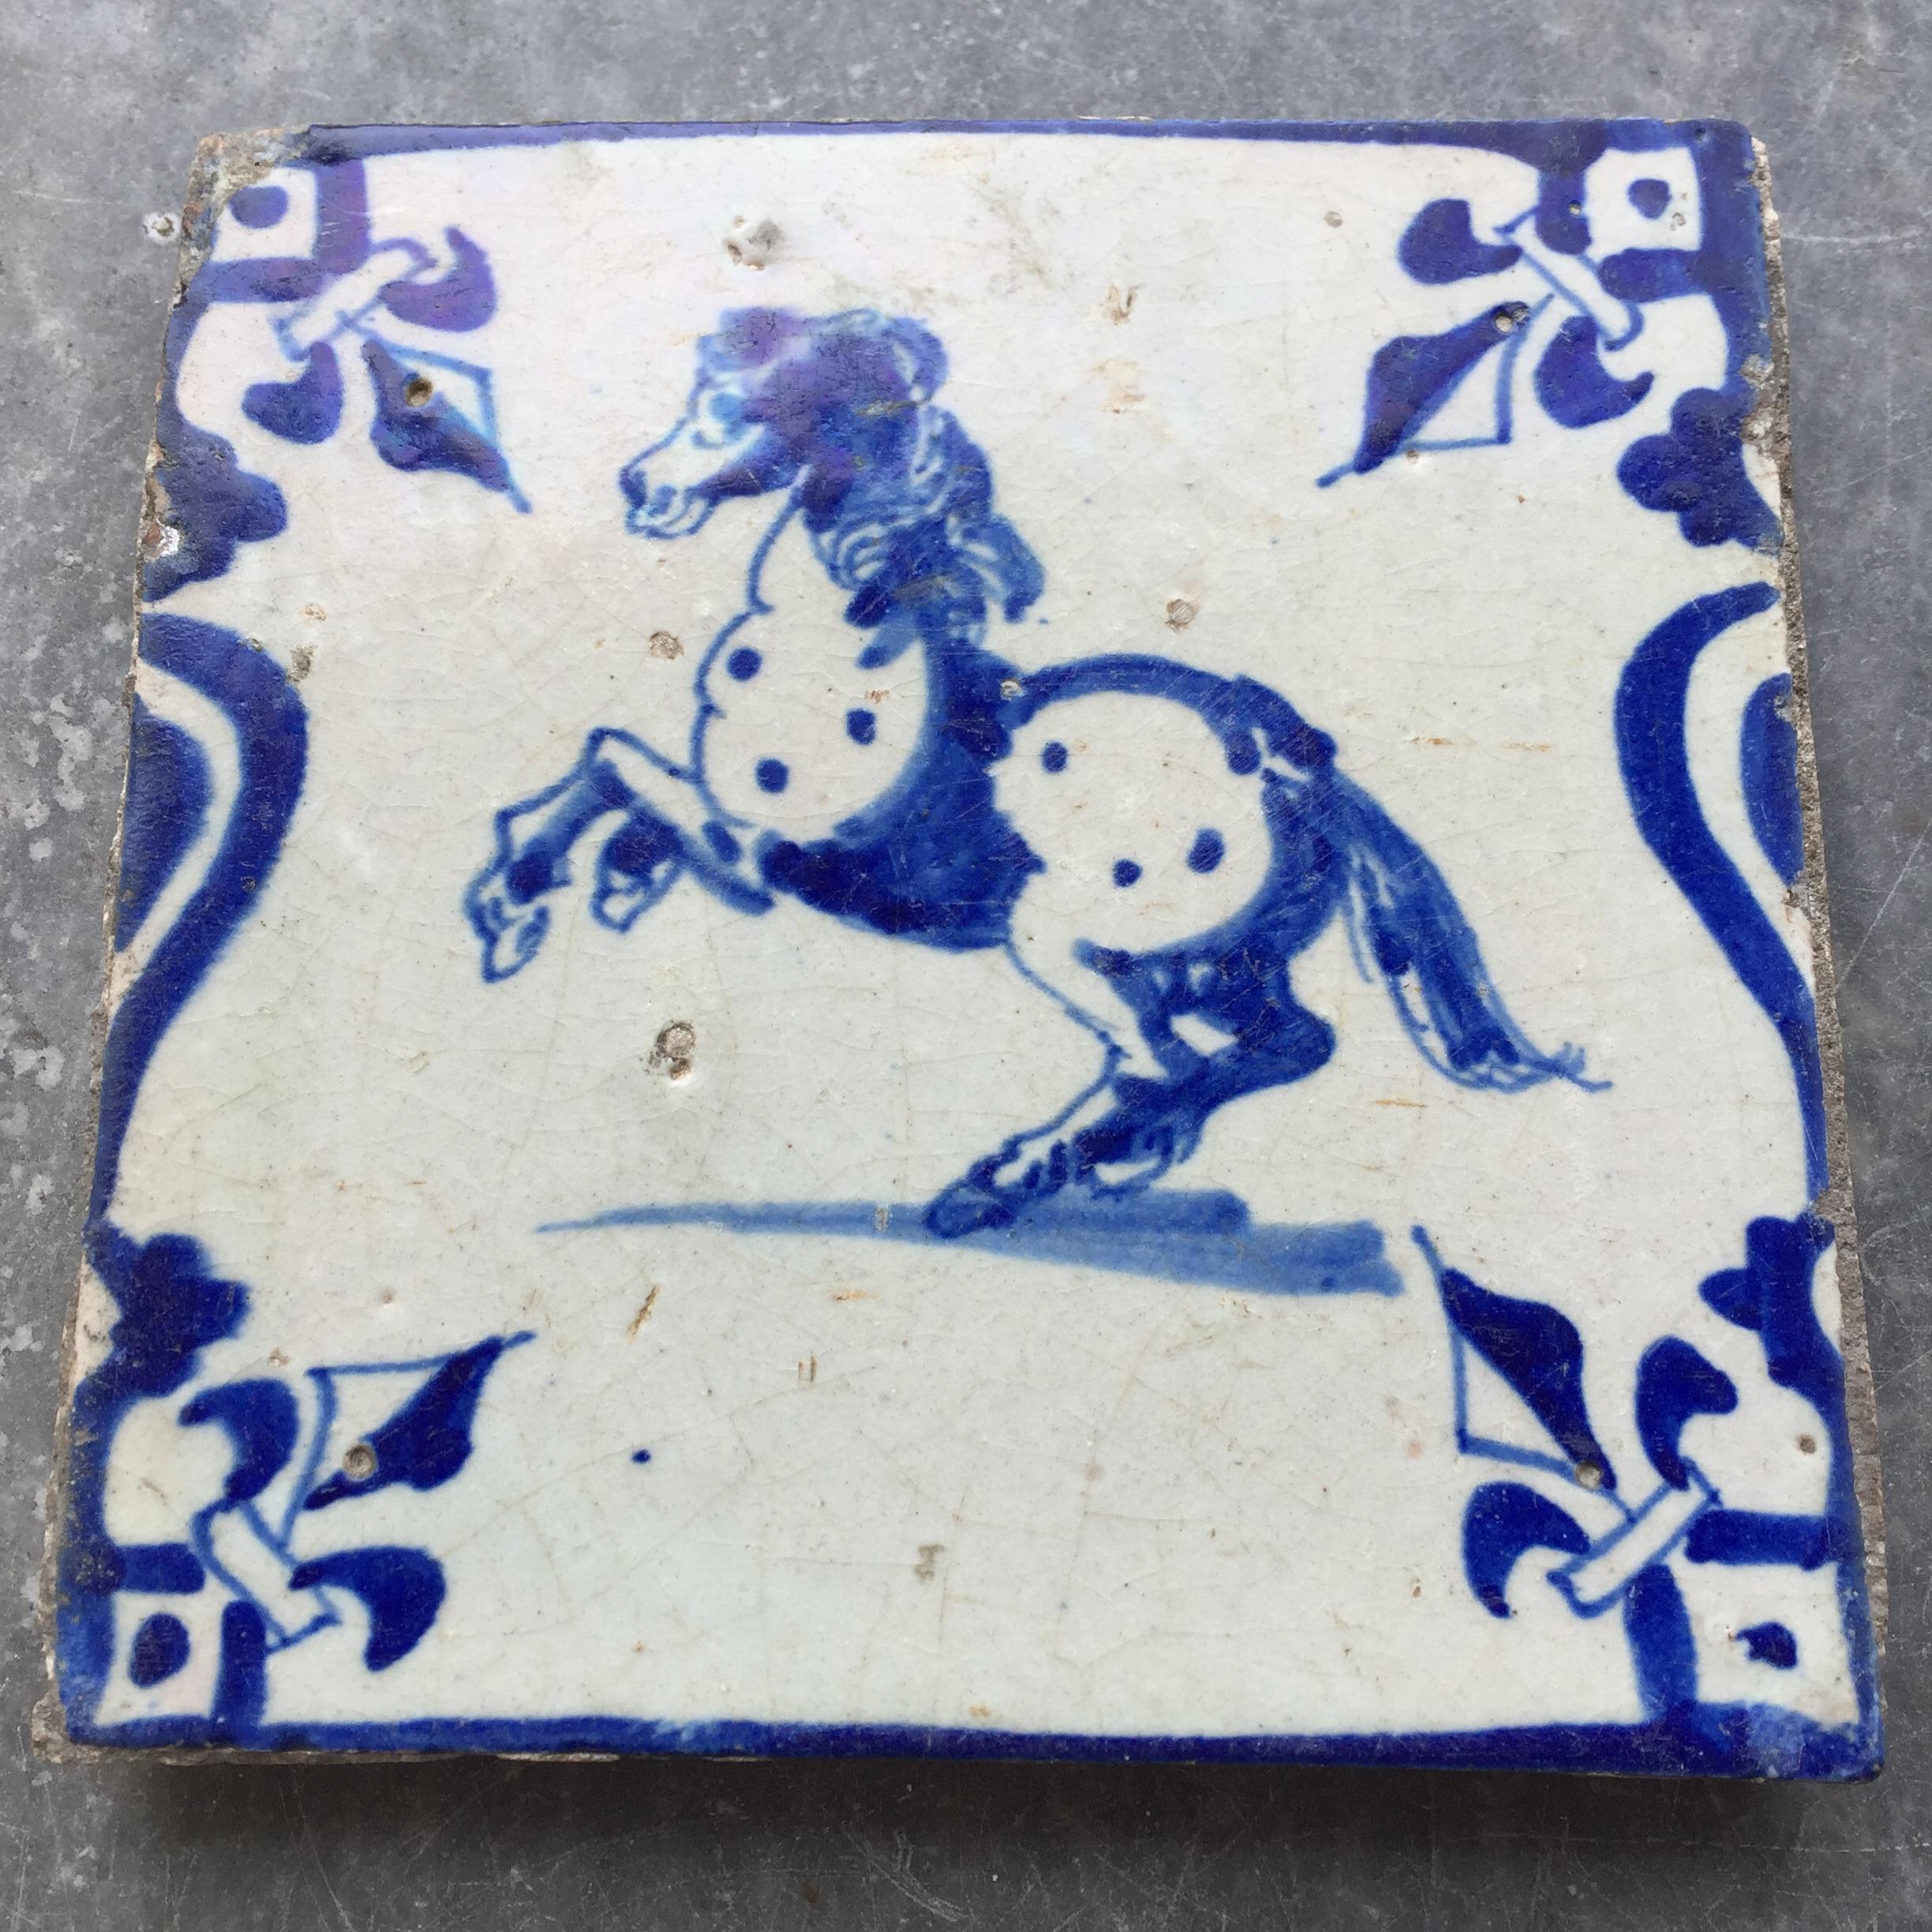 Fired Blue and White Dutch Delft Tile with Grey Horse, Mid 17th Century